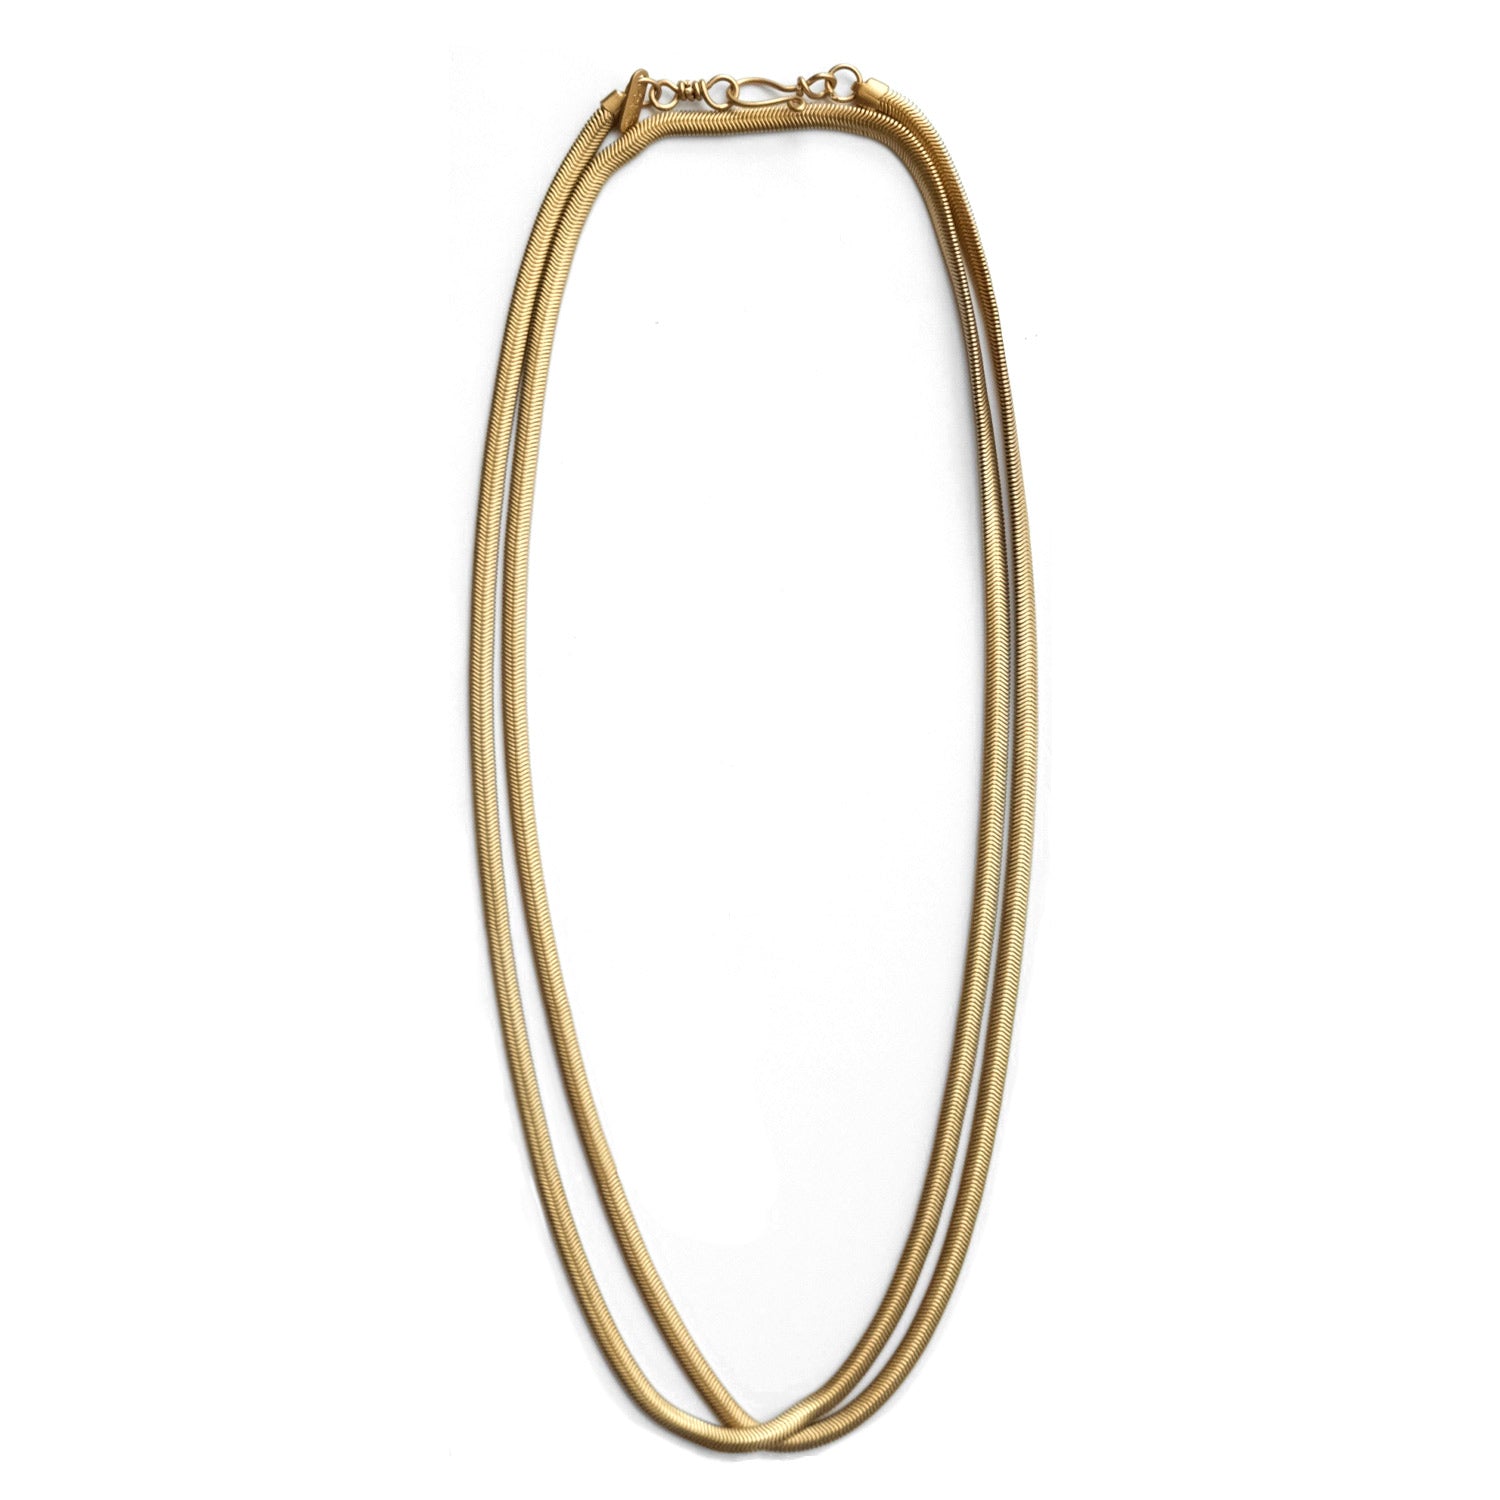 Sarah Cavender 36 inch Gold Snake Chain necklace.